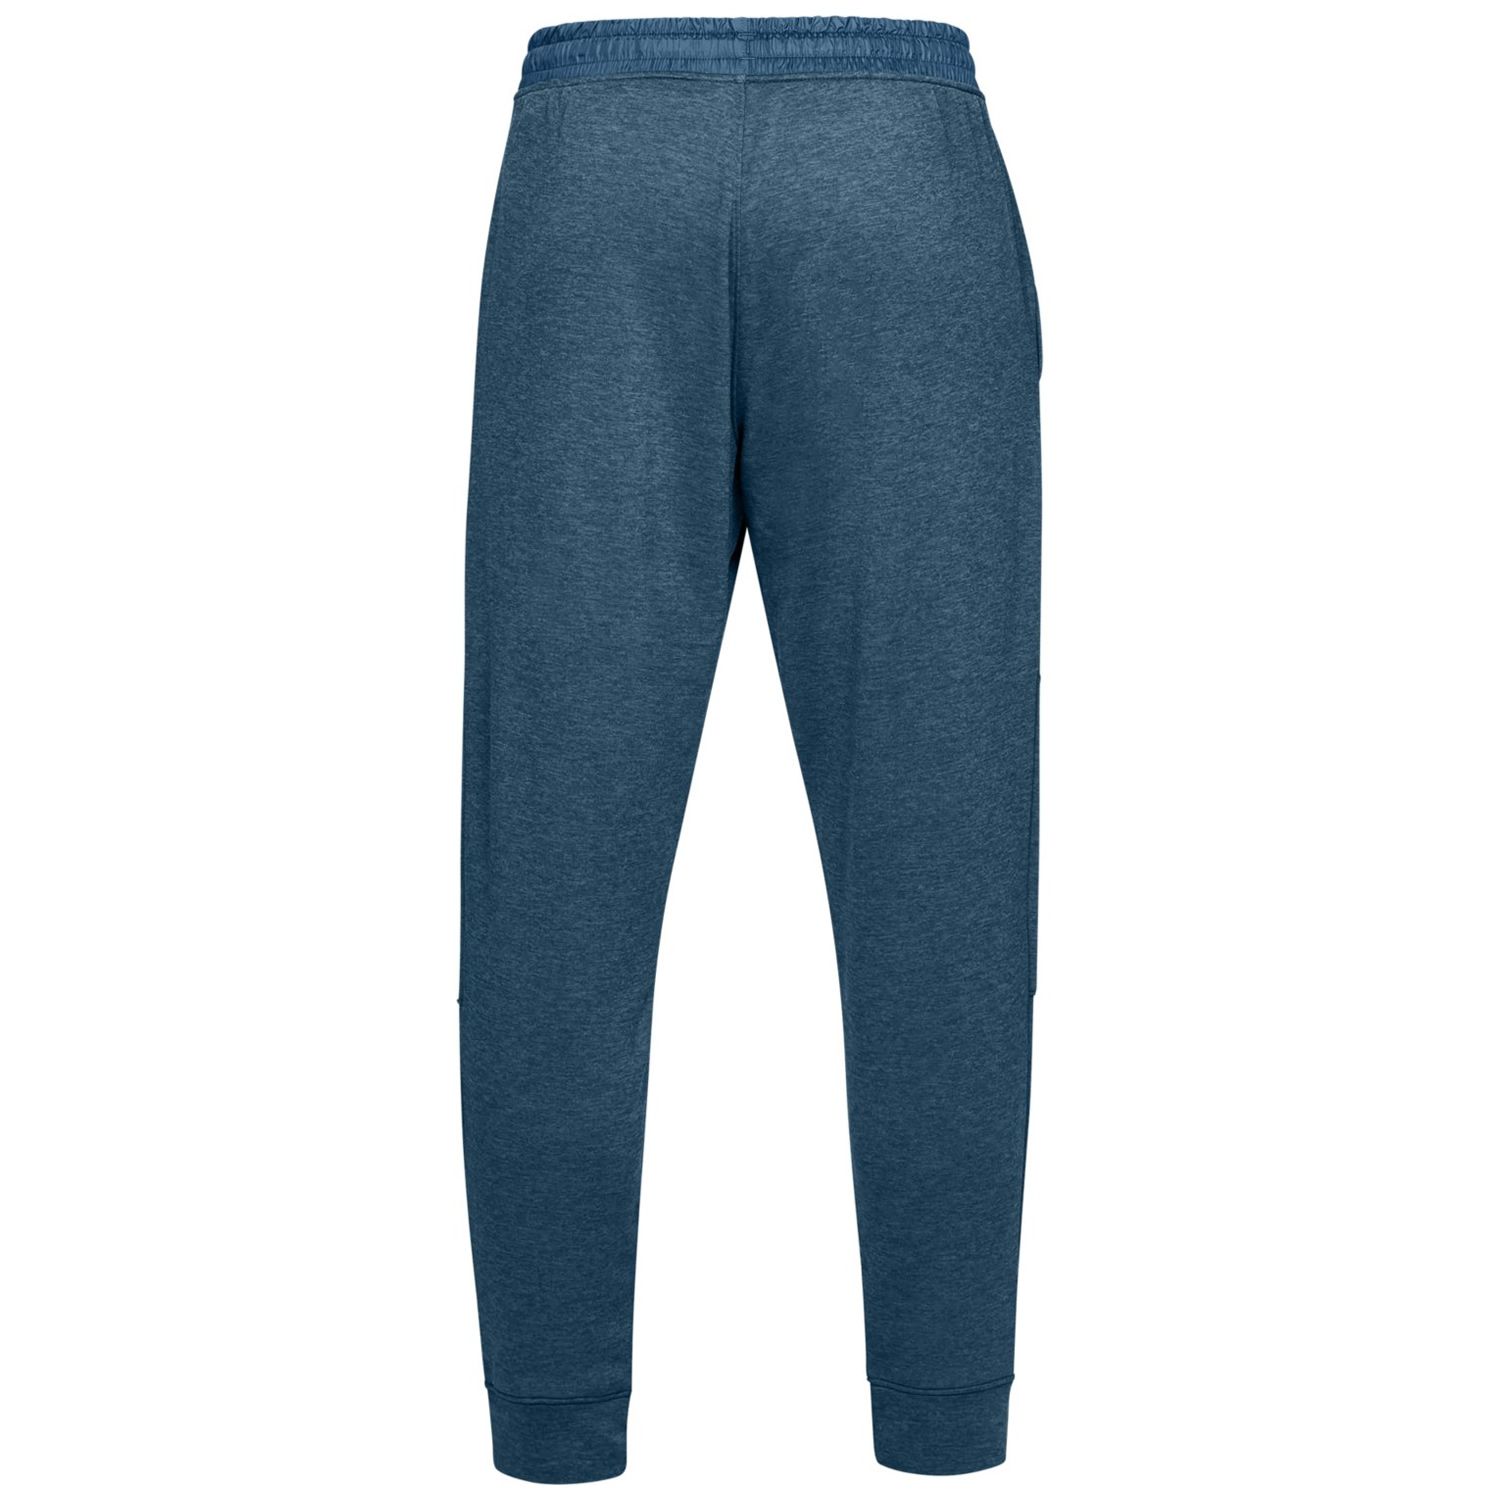 Under Armour MK1 Terry Jogger Trousers Petrol Blue | Scottsdale Golf